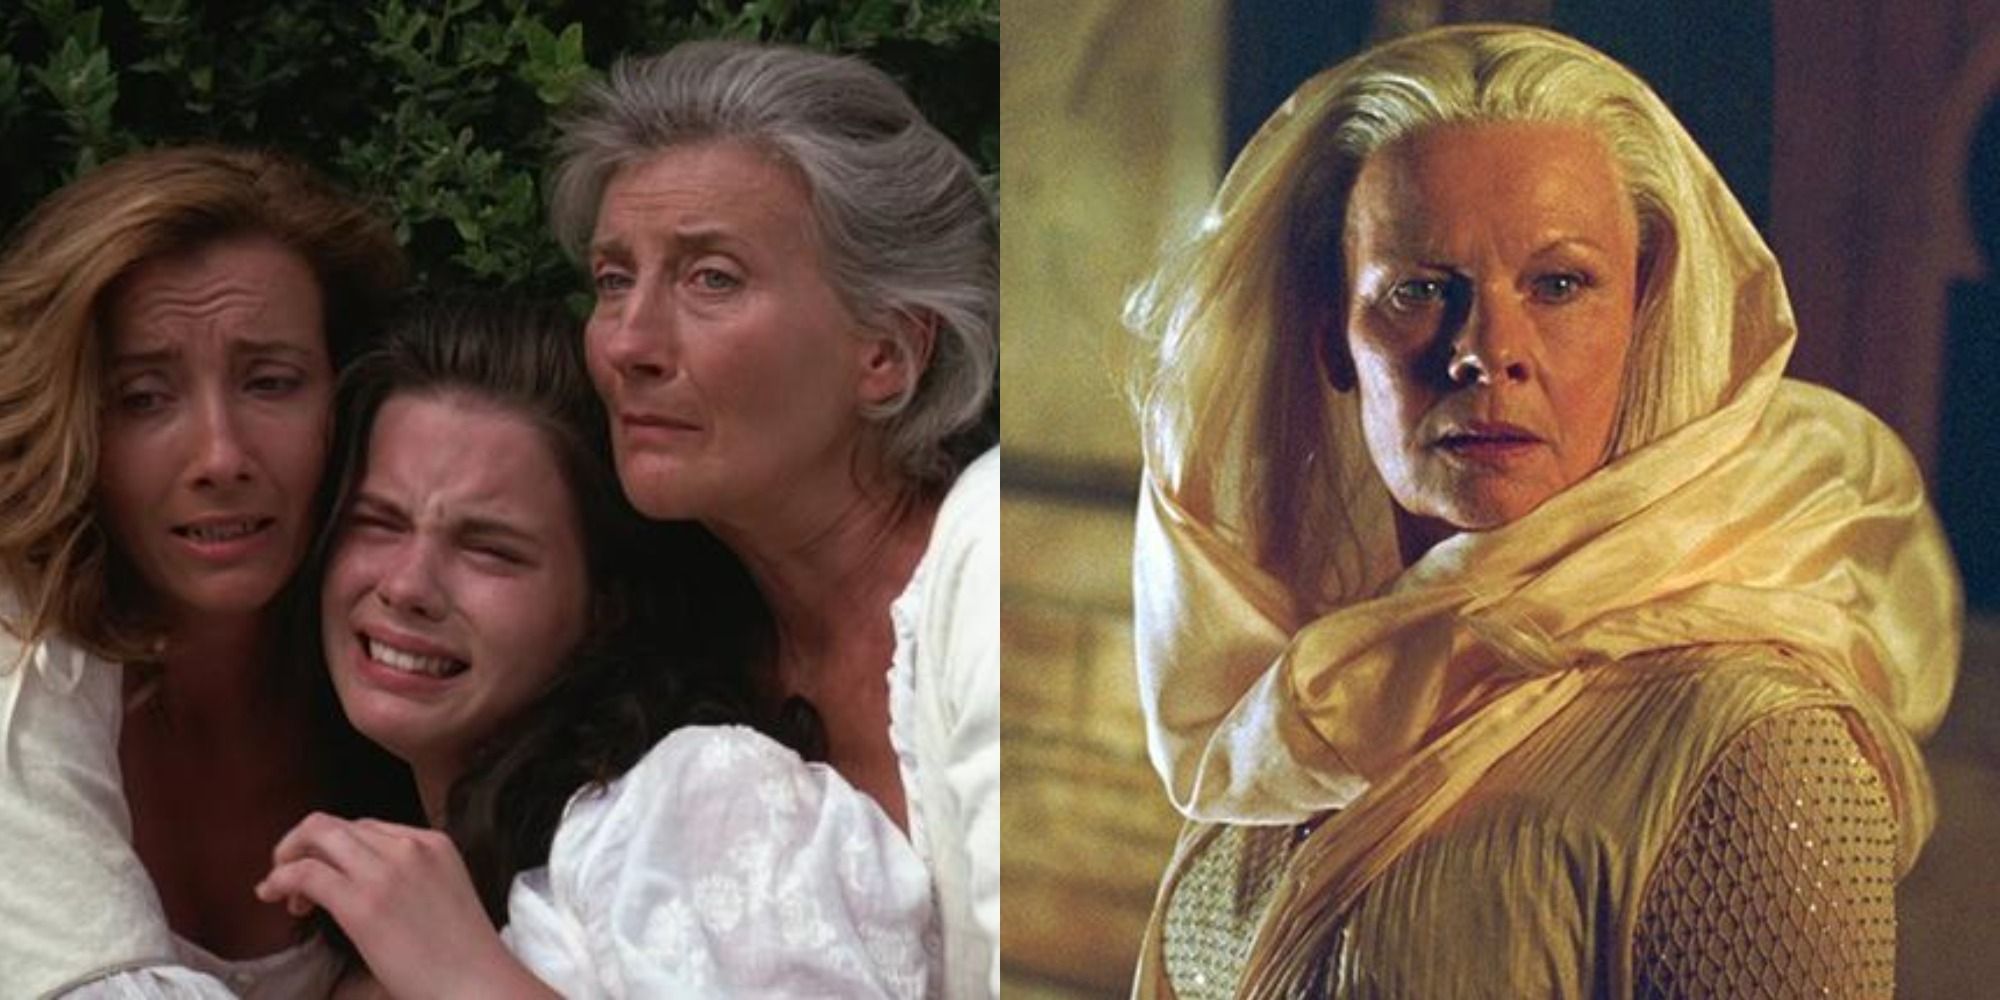 Split image of Emma Thompson, Kate Beckinsale, and Phyllida Law in Much Ado About Nothing, and Judi Dench in The Chronicles of Riddick